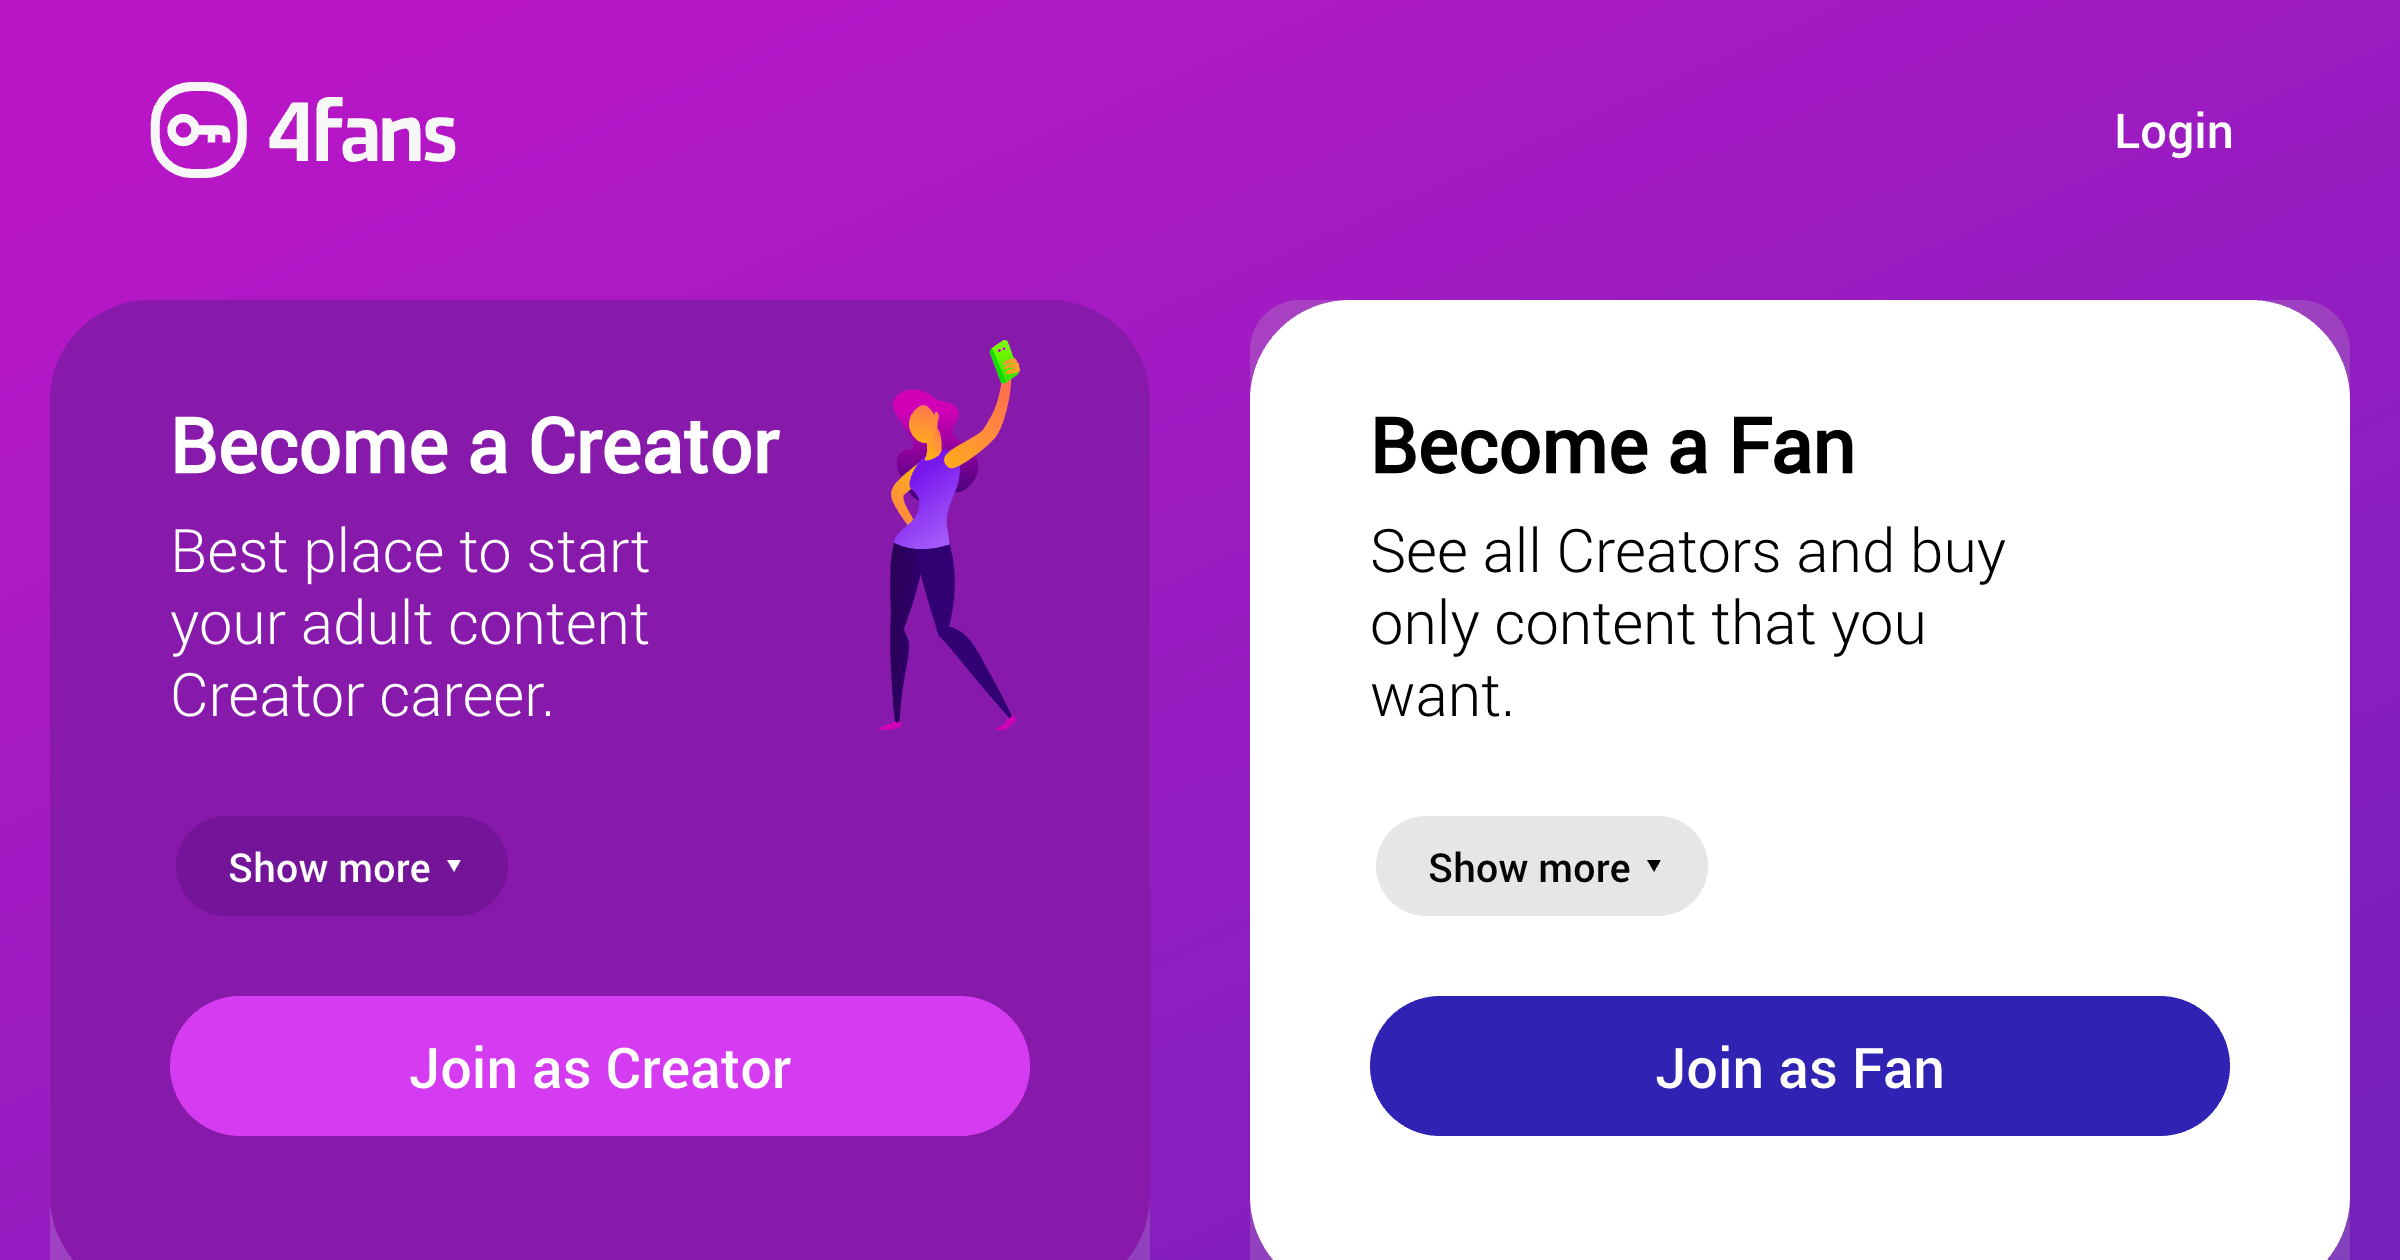 Only fans creator release form